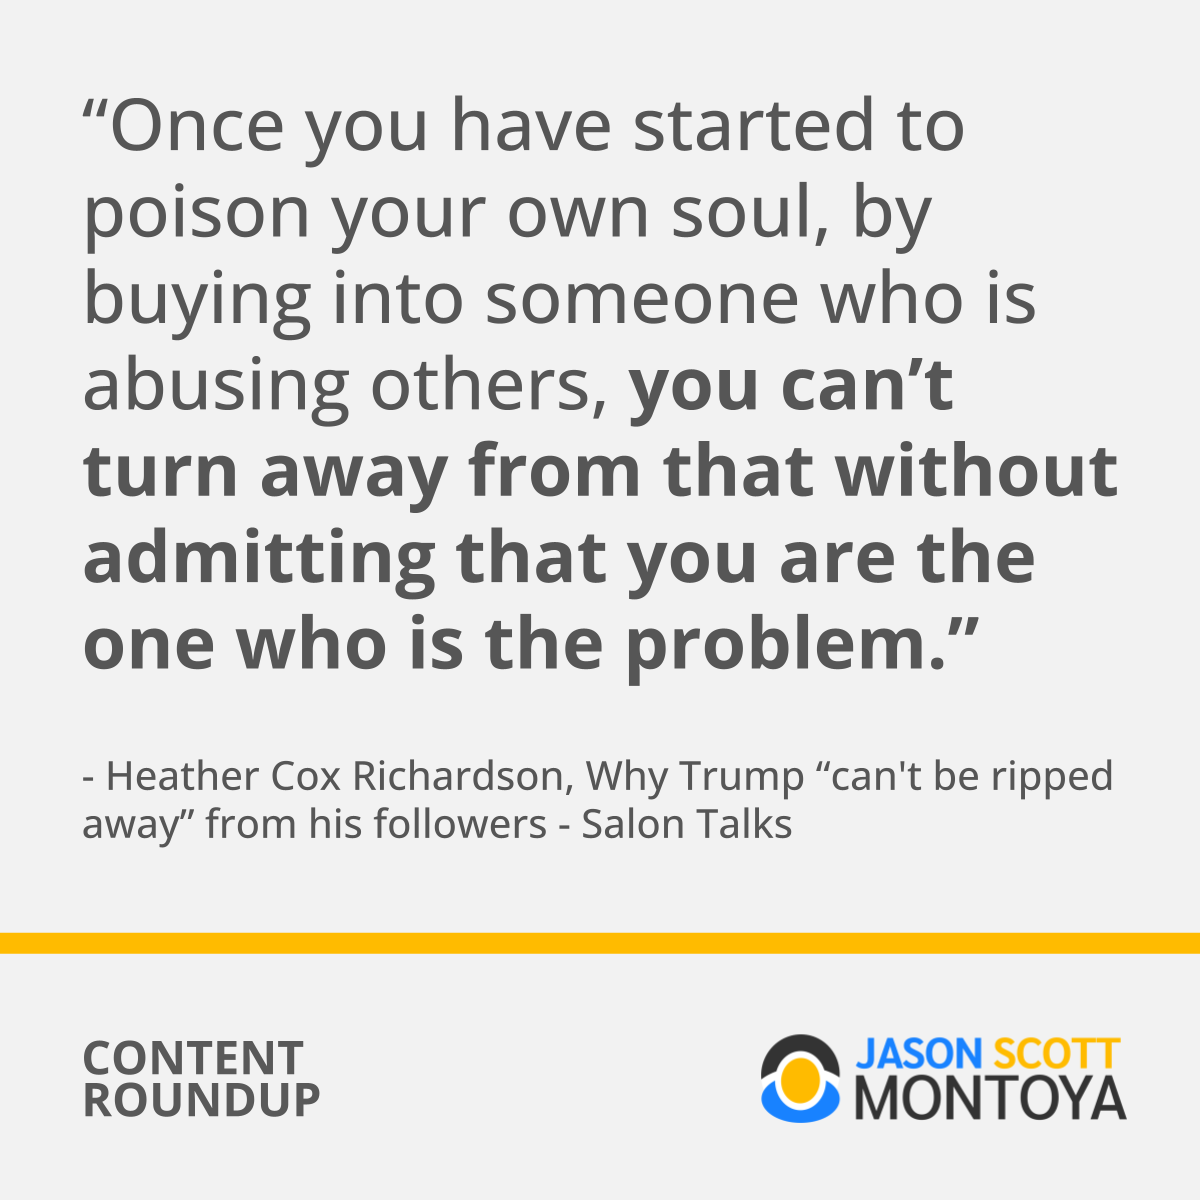 “Once you have started to poison your own soul, by buying into someone who is abusing others, you can’t turn away from that without admitting that you are the one who is the problem.” - Heather Cox Richardson